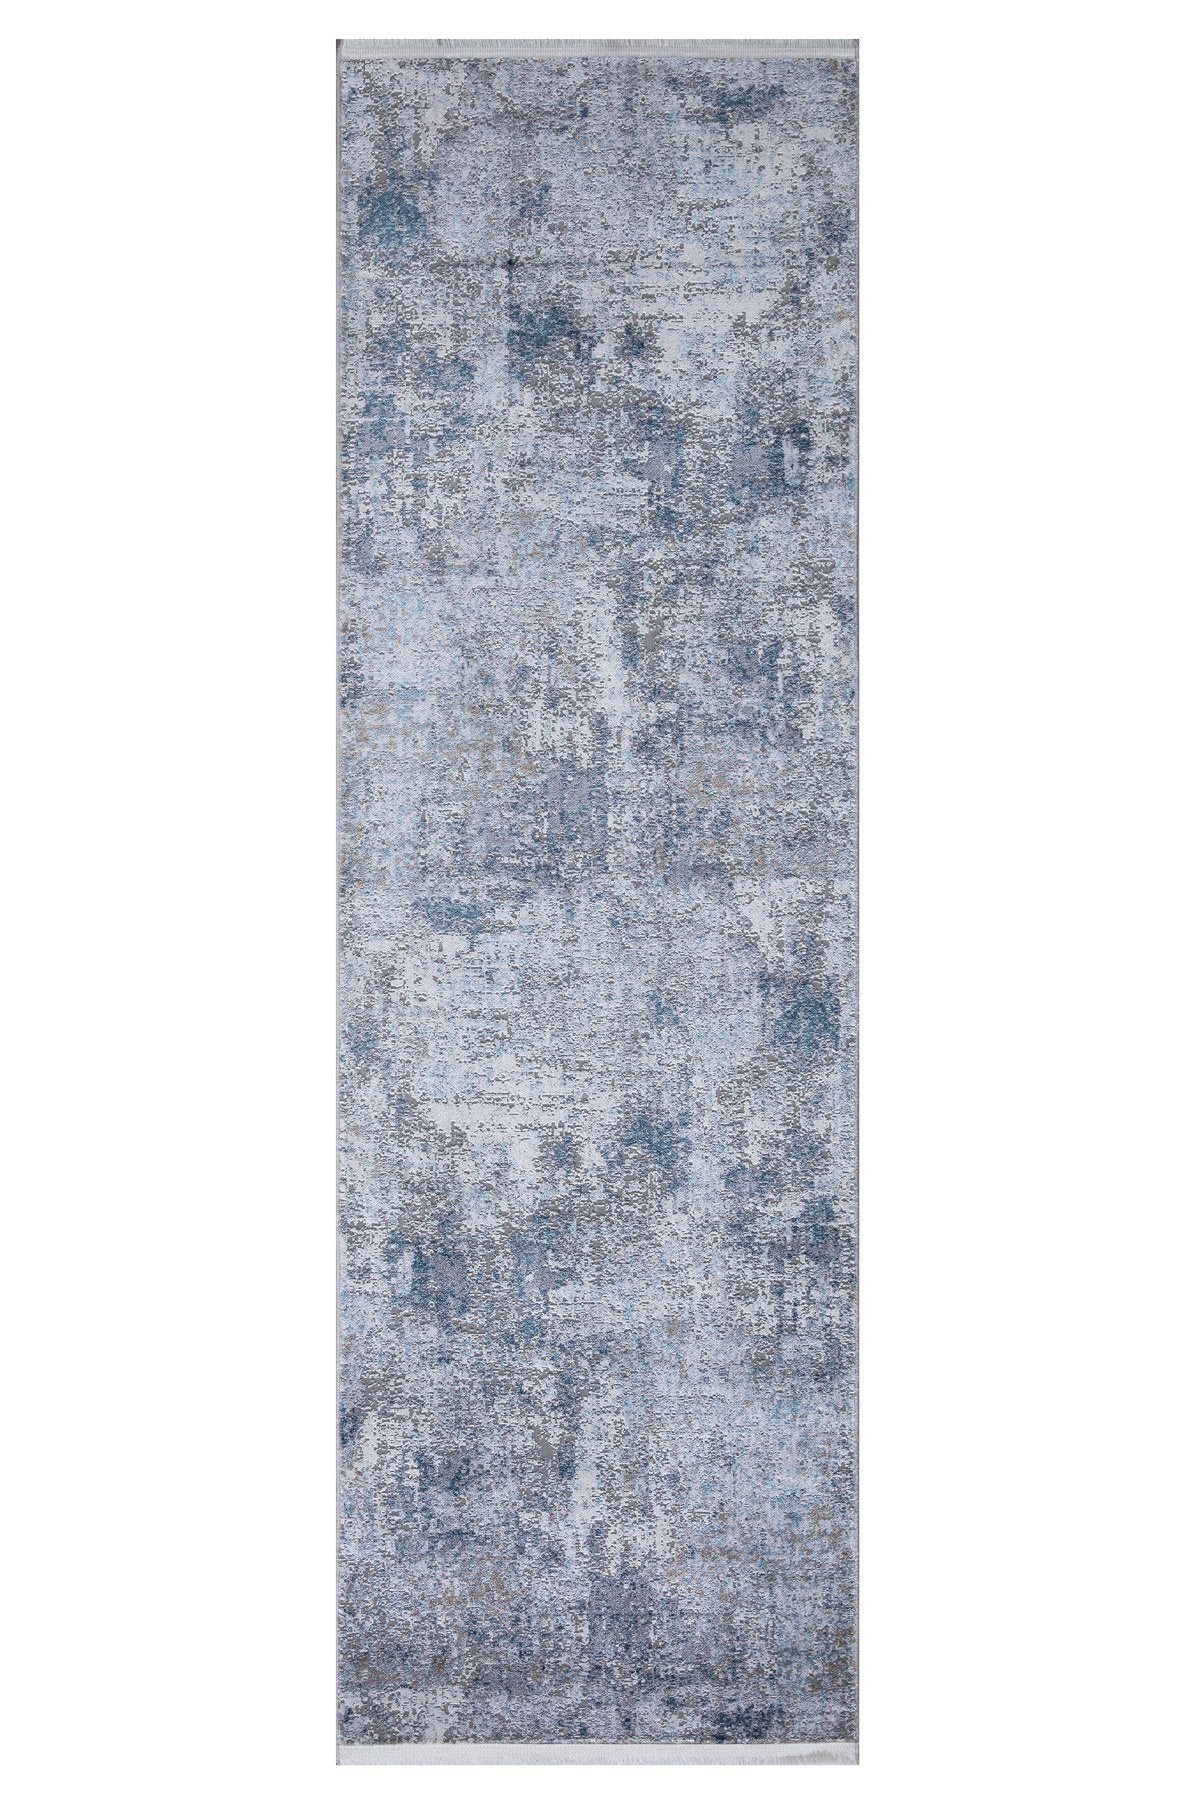 Luxi 8432 Grey & Blue Rug The Rugs Outlet 